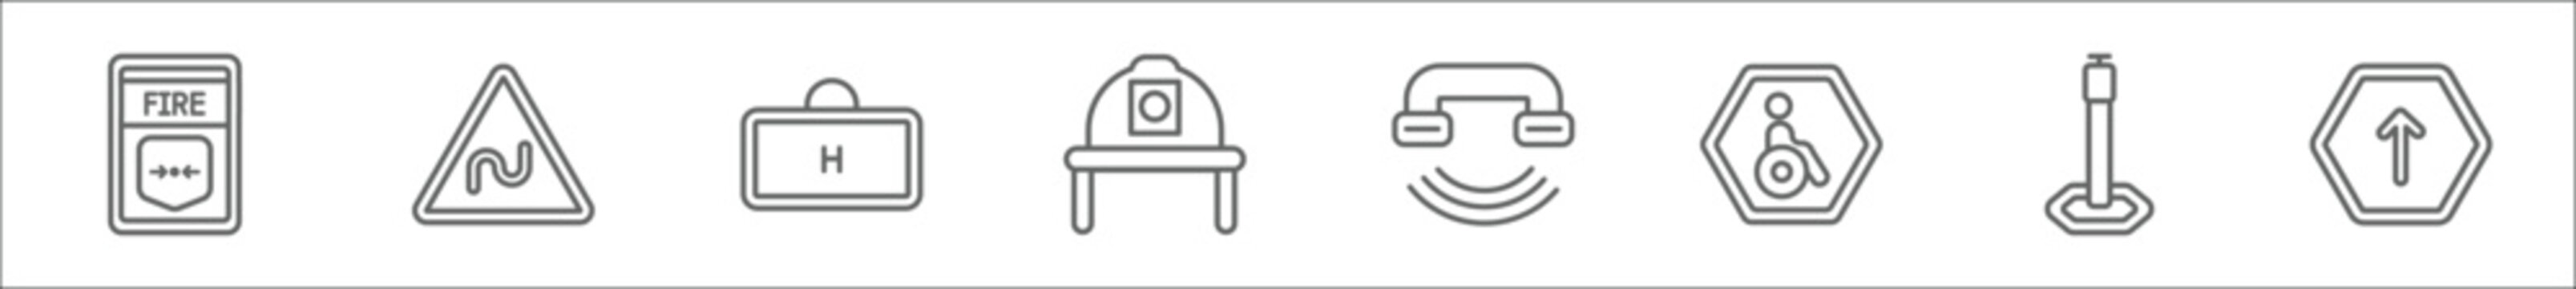 outline set of alert line icons. linear vector icons such as fire button, bend, medical support, firefighter helmet, call center, handicap, bollard, ahead